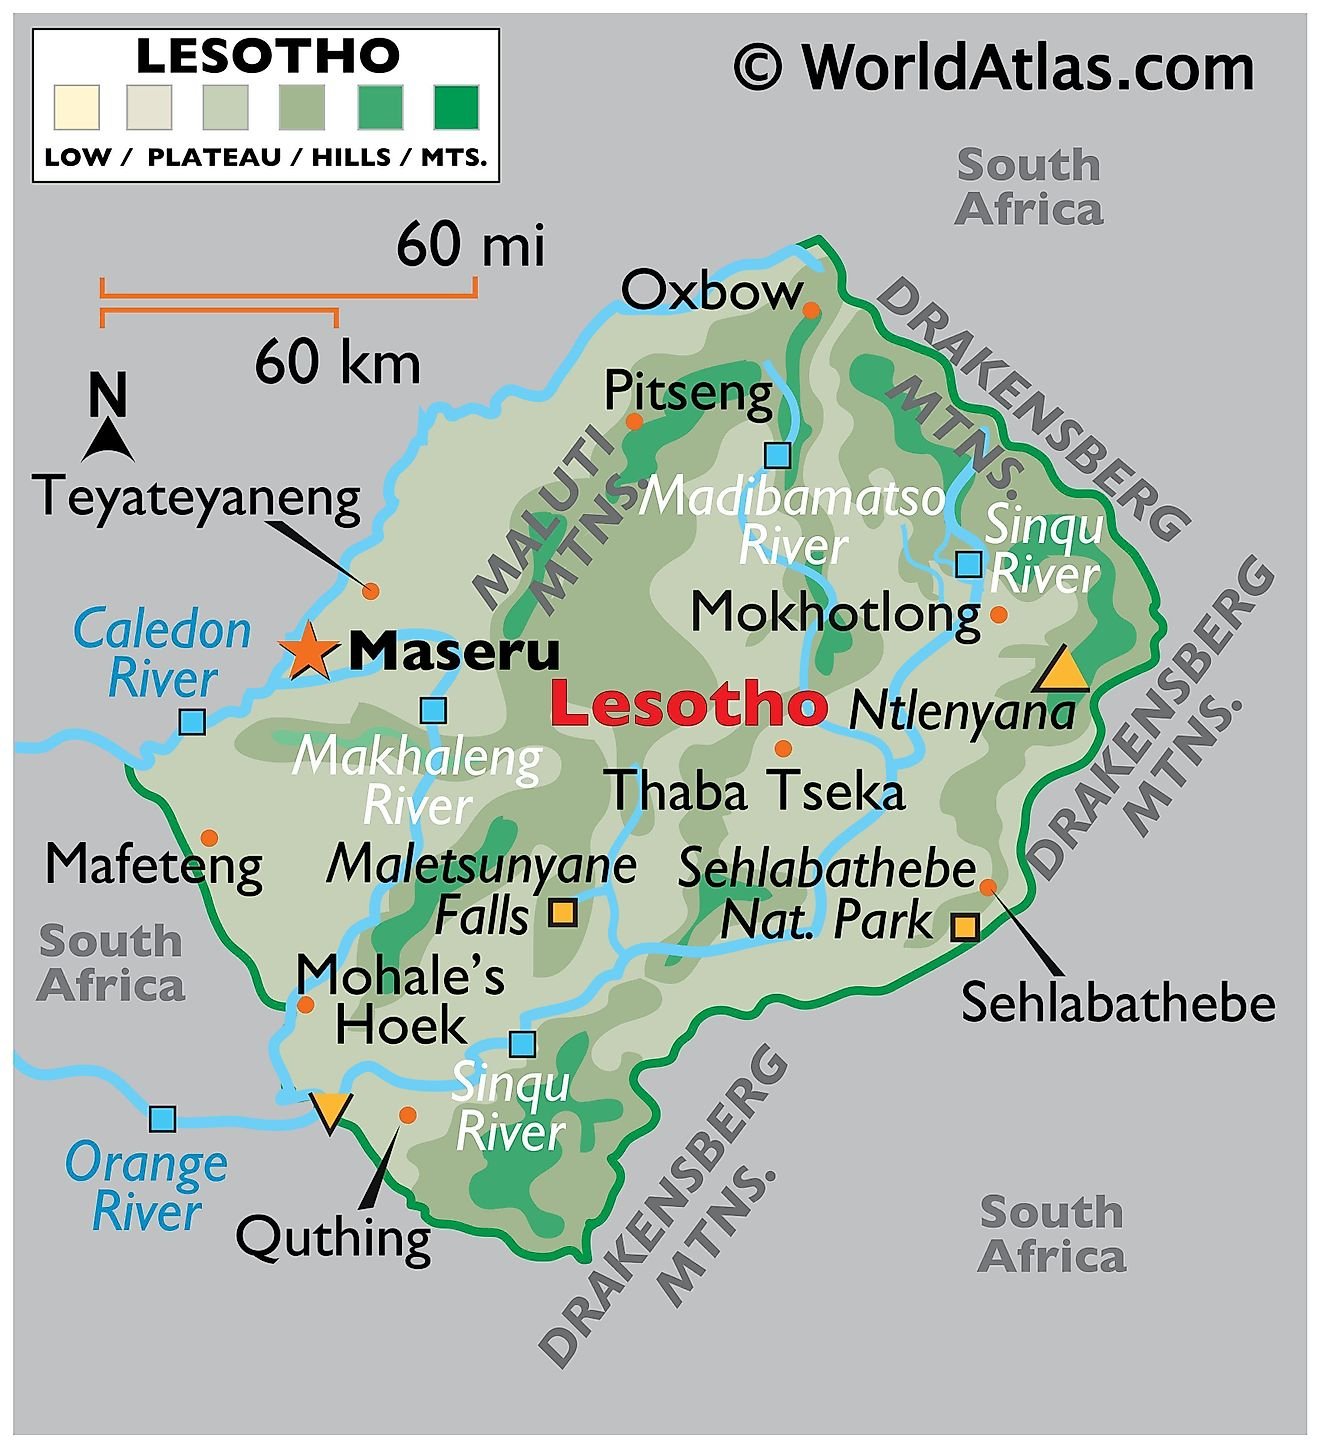 Lesotho Maps & Facts